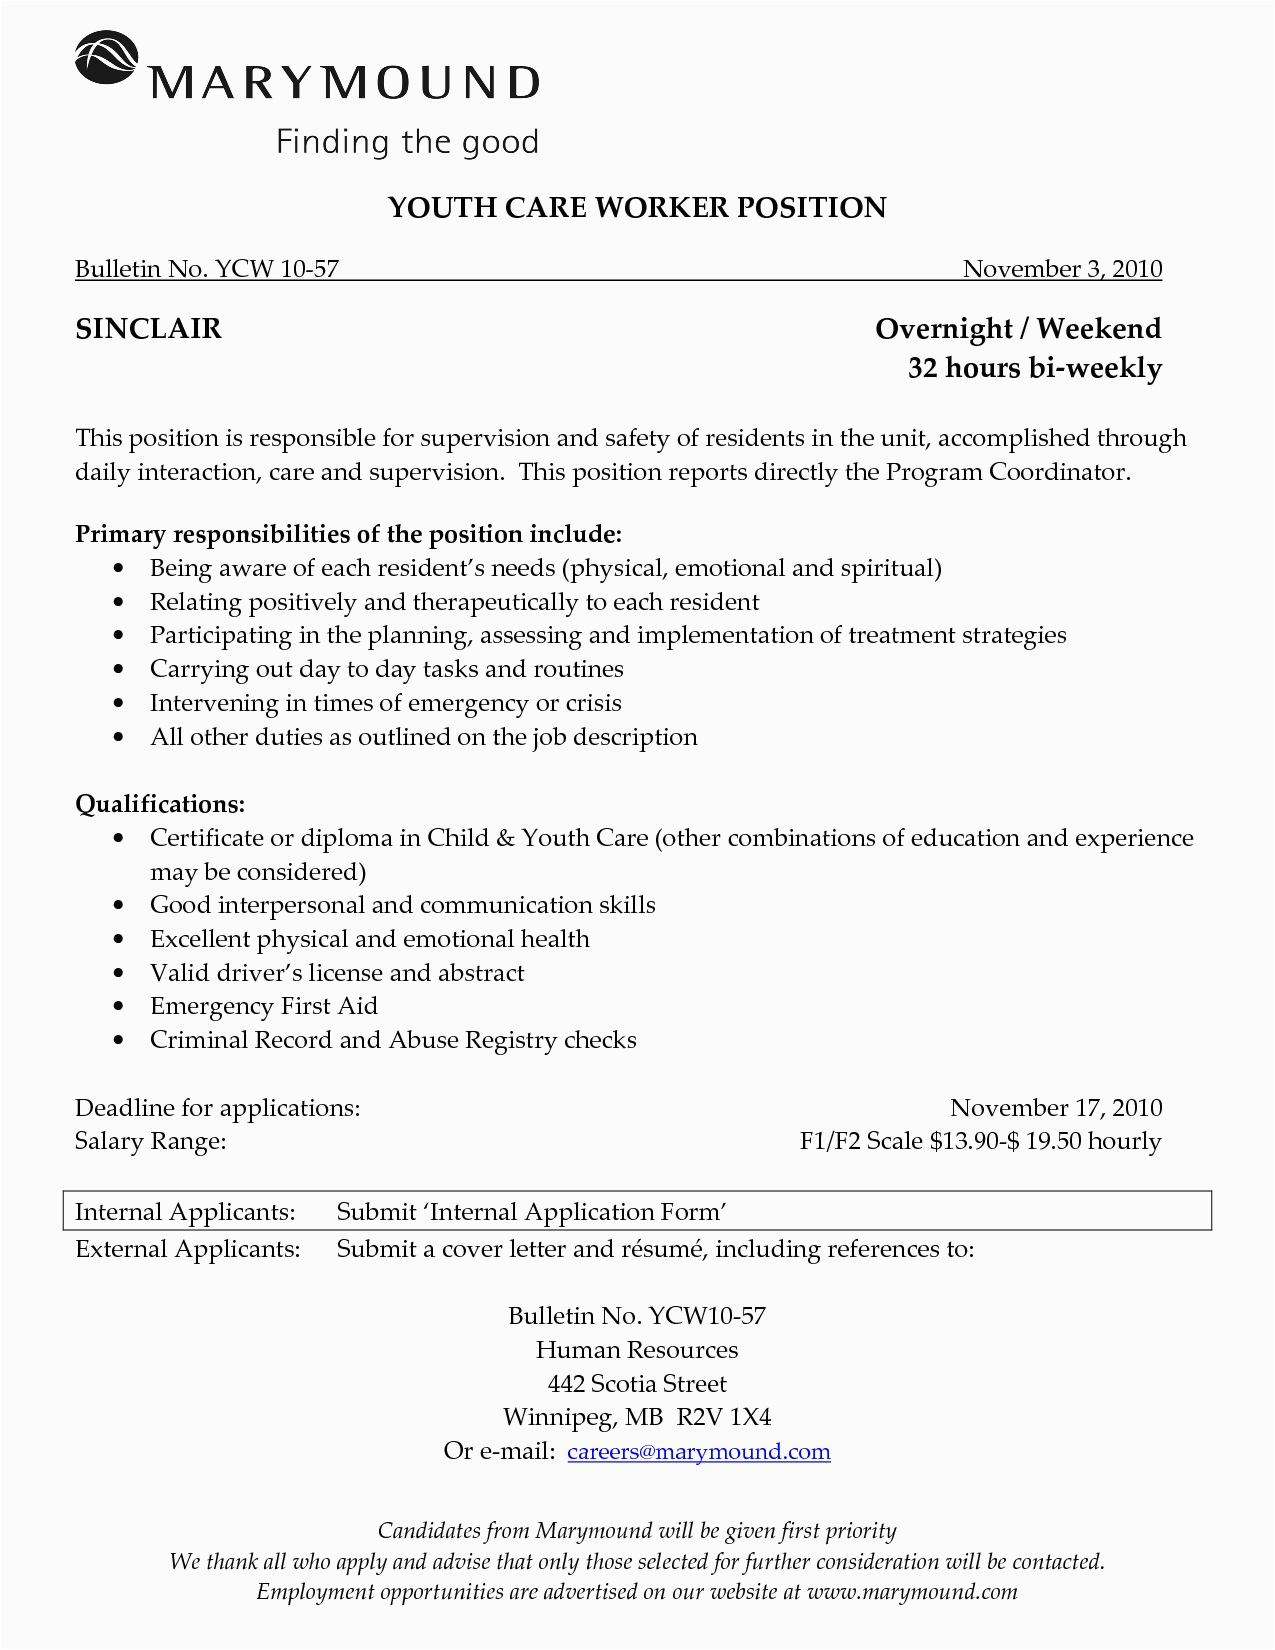 home support worker resume